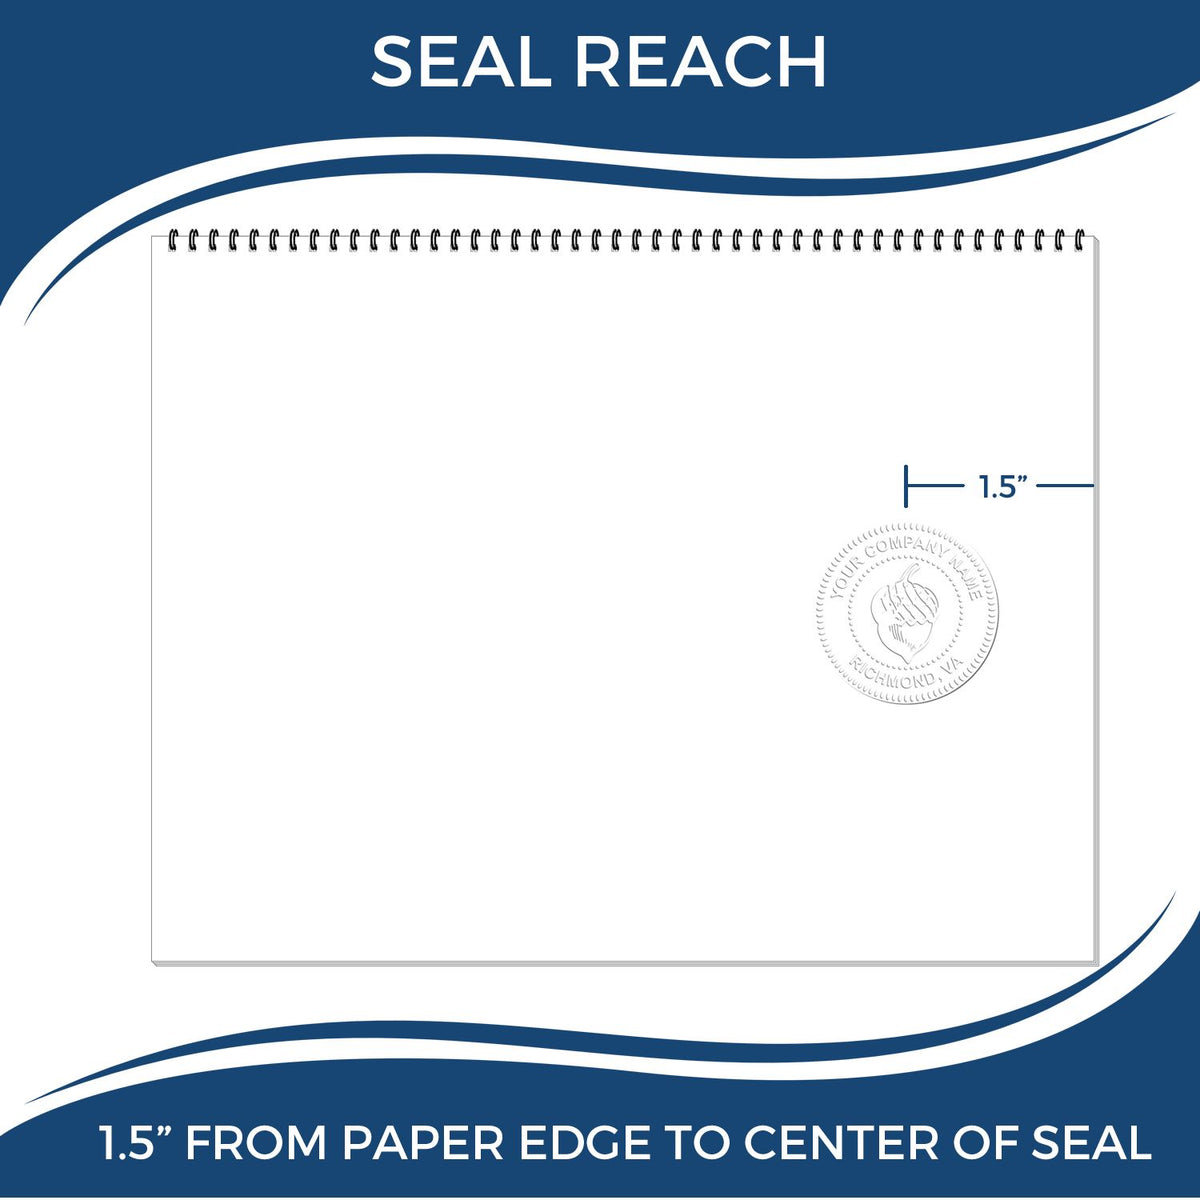 An infographic showing the seal reach which is represented by a ruler and a miniature seal image of the Handheld Rhode Island Architect Seal Embosser